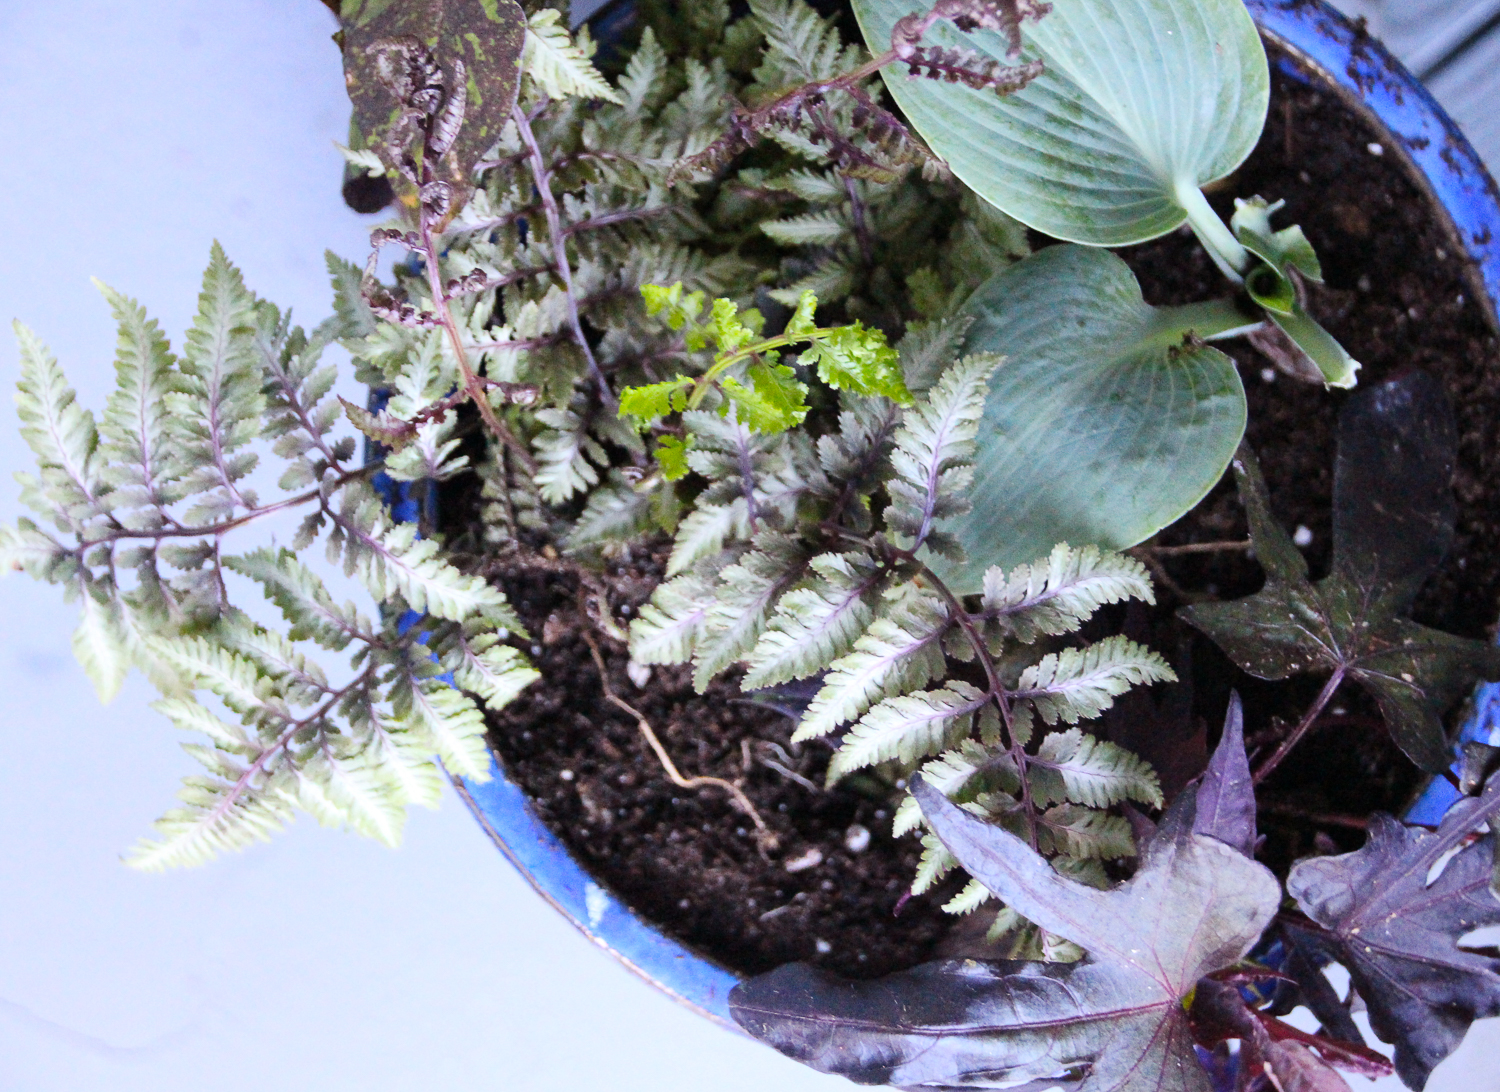 Looking down on the ferns in the garden pots.